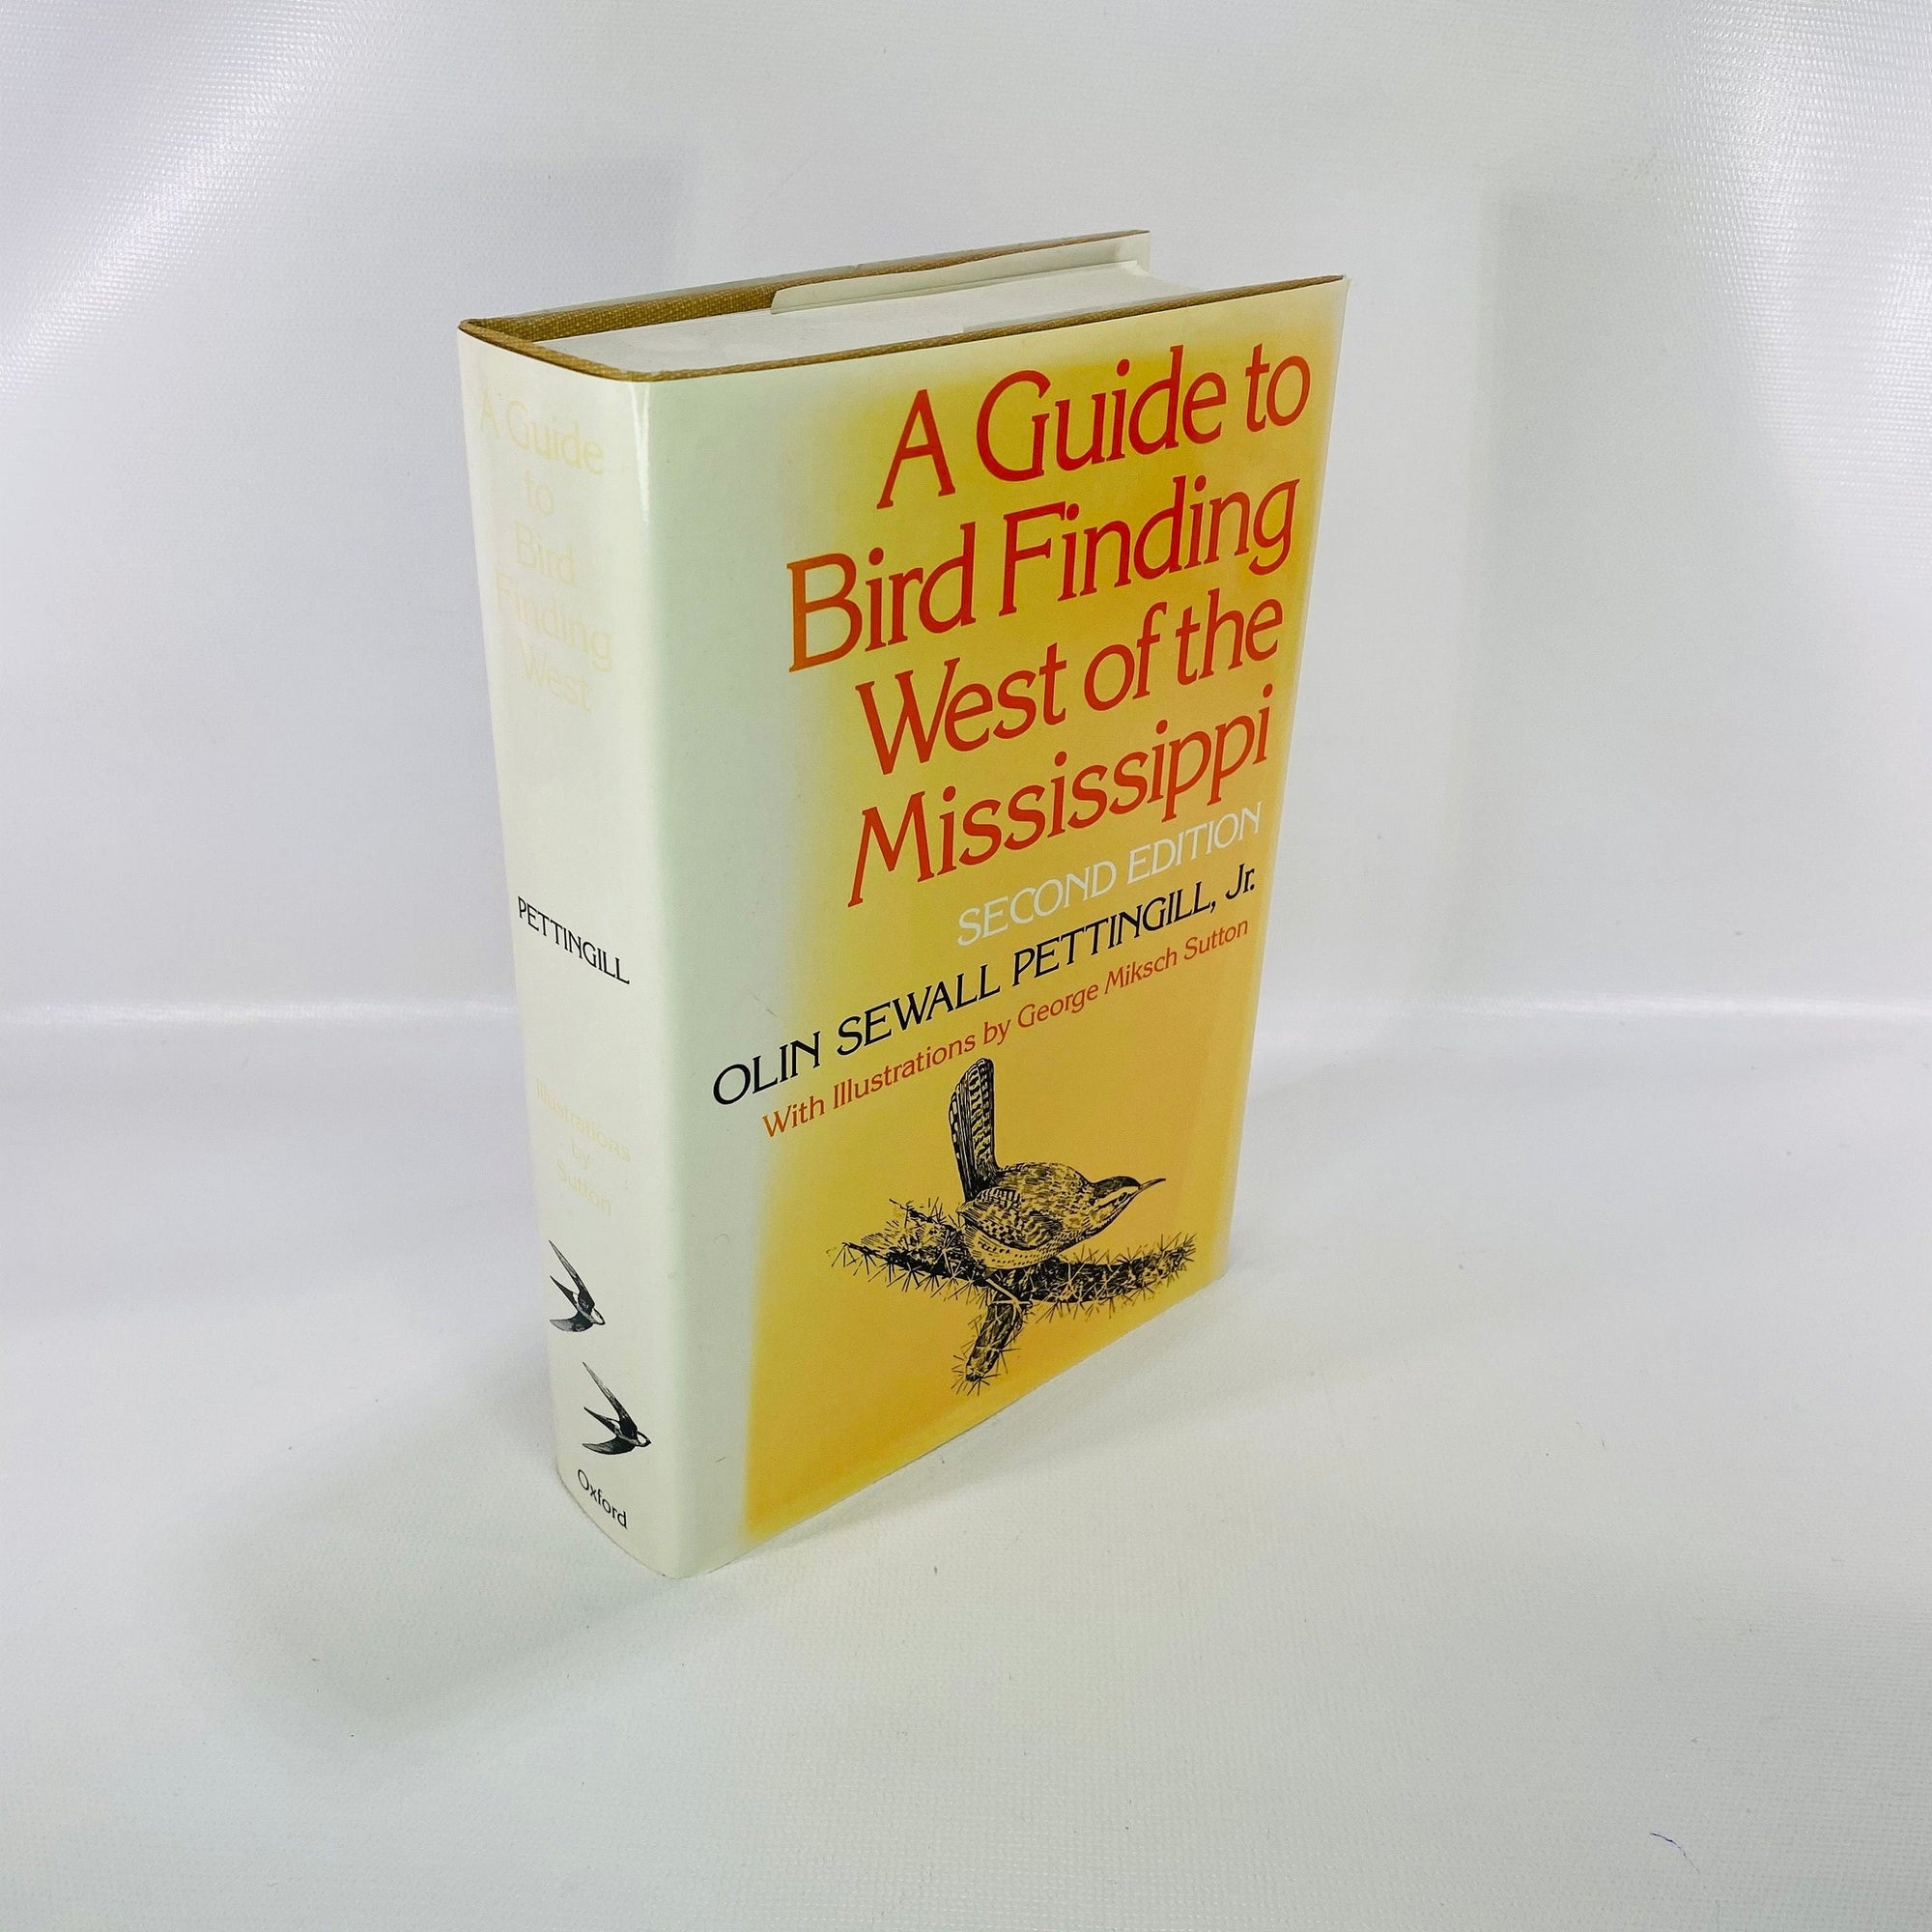 A Guide to Bird Finding West of the Mississippi by Olin Sewall Pettingill 1981 Vintage Book